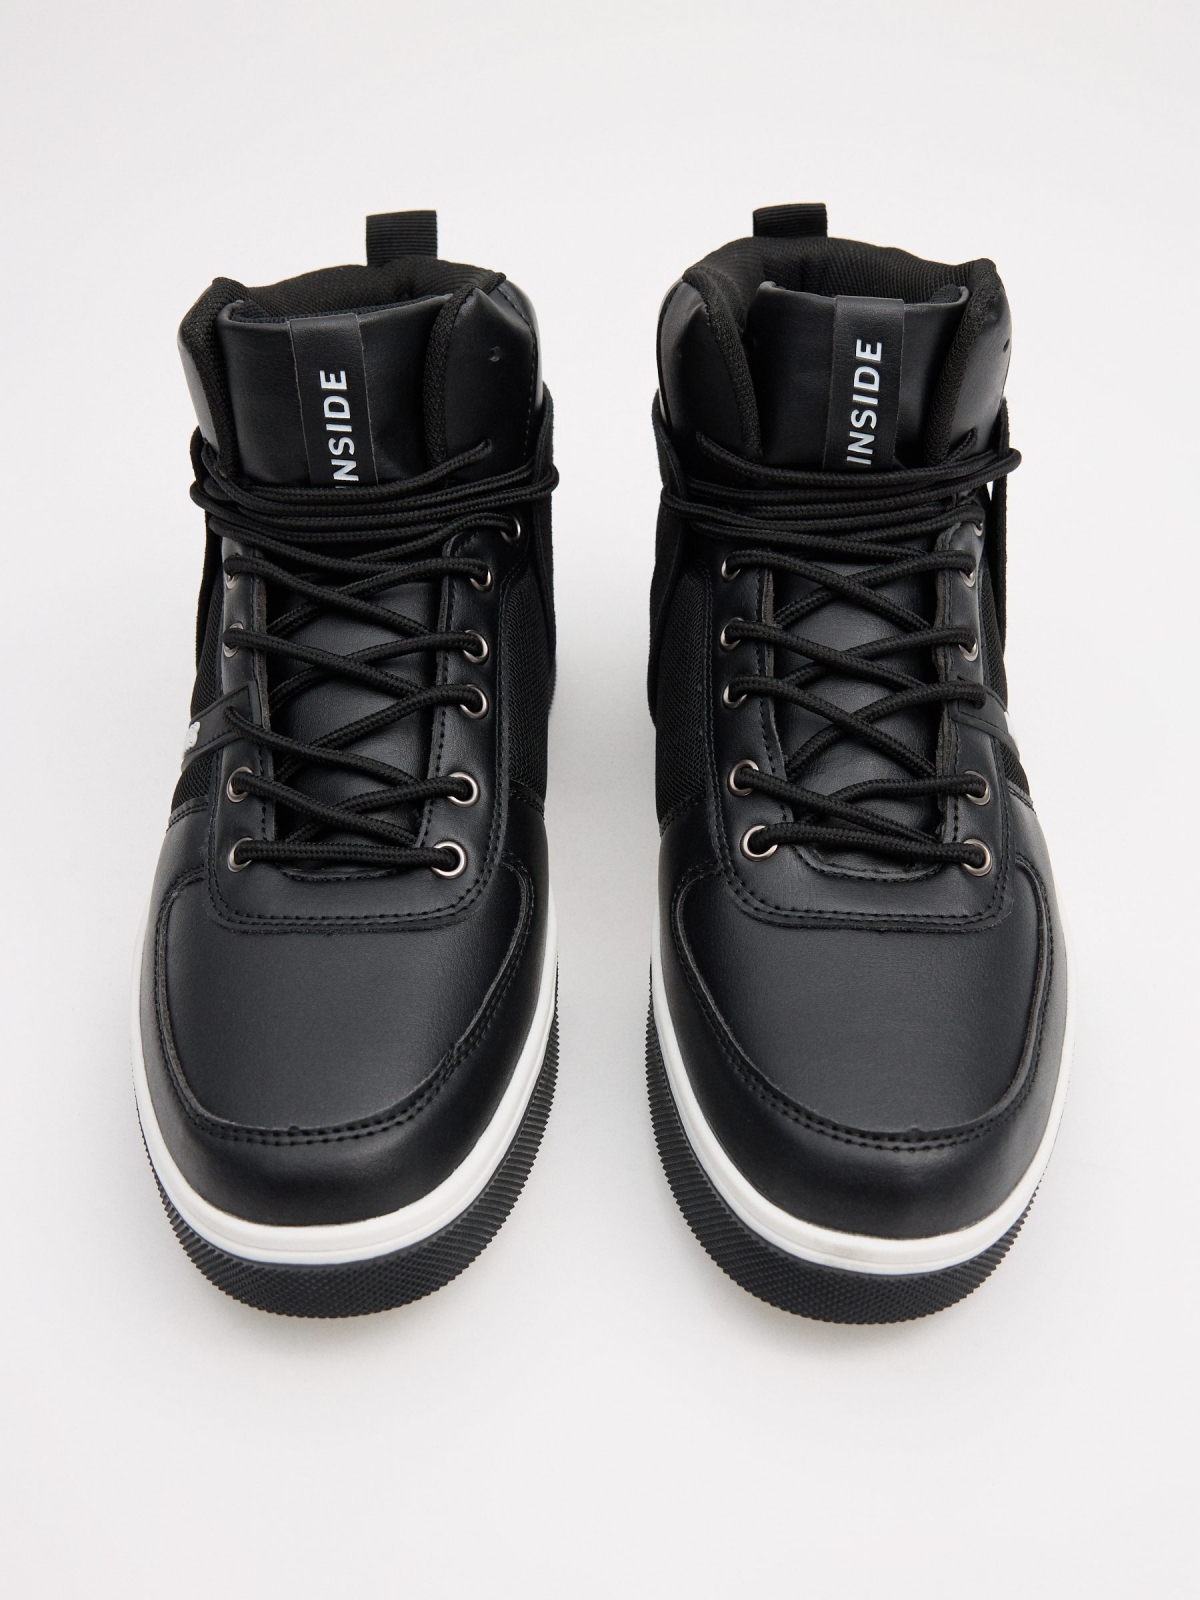 Black leather effect sports boots black zenithal view